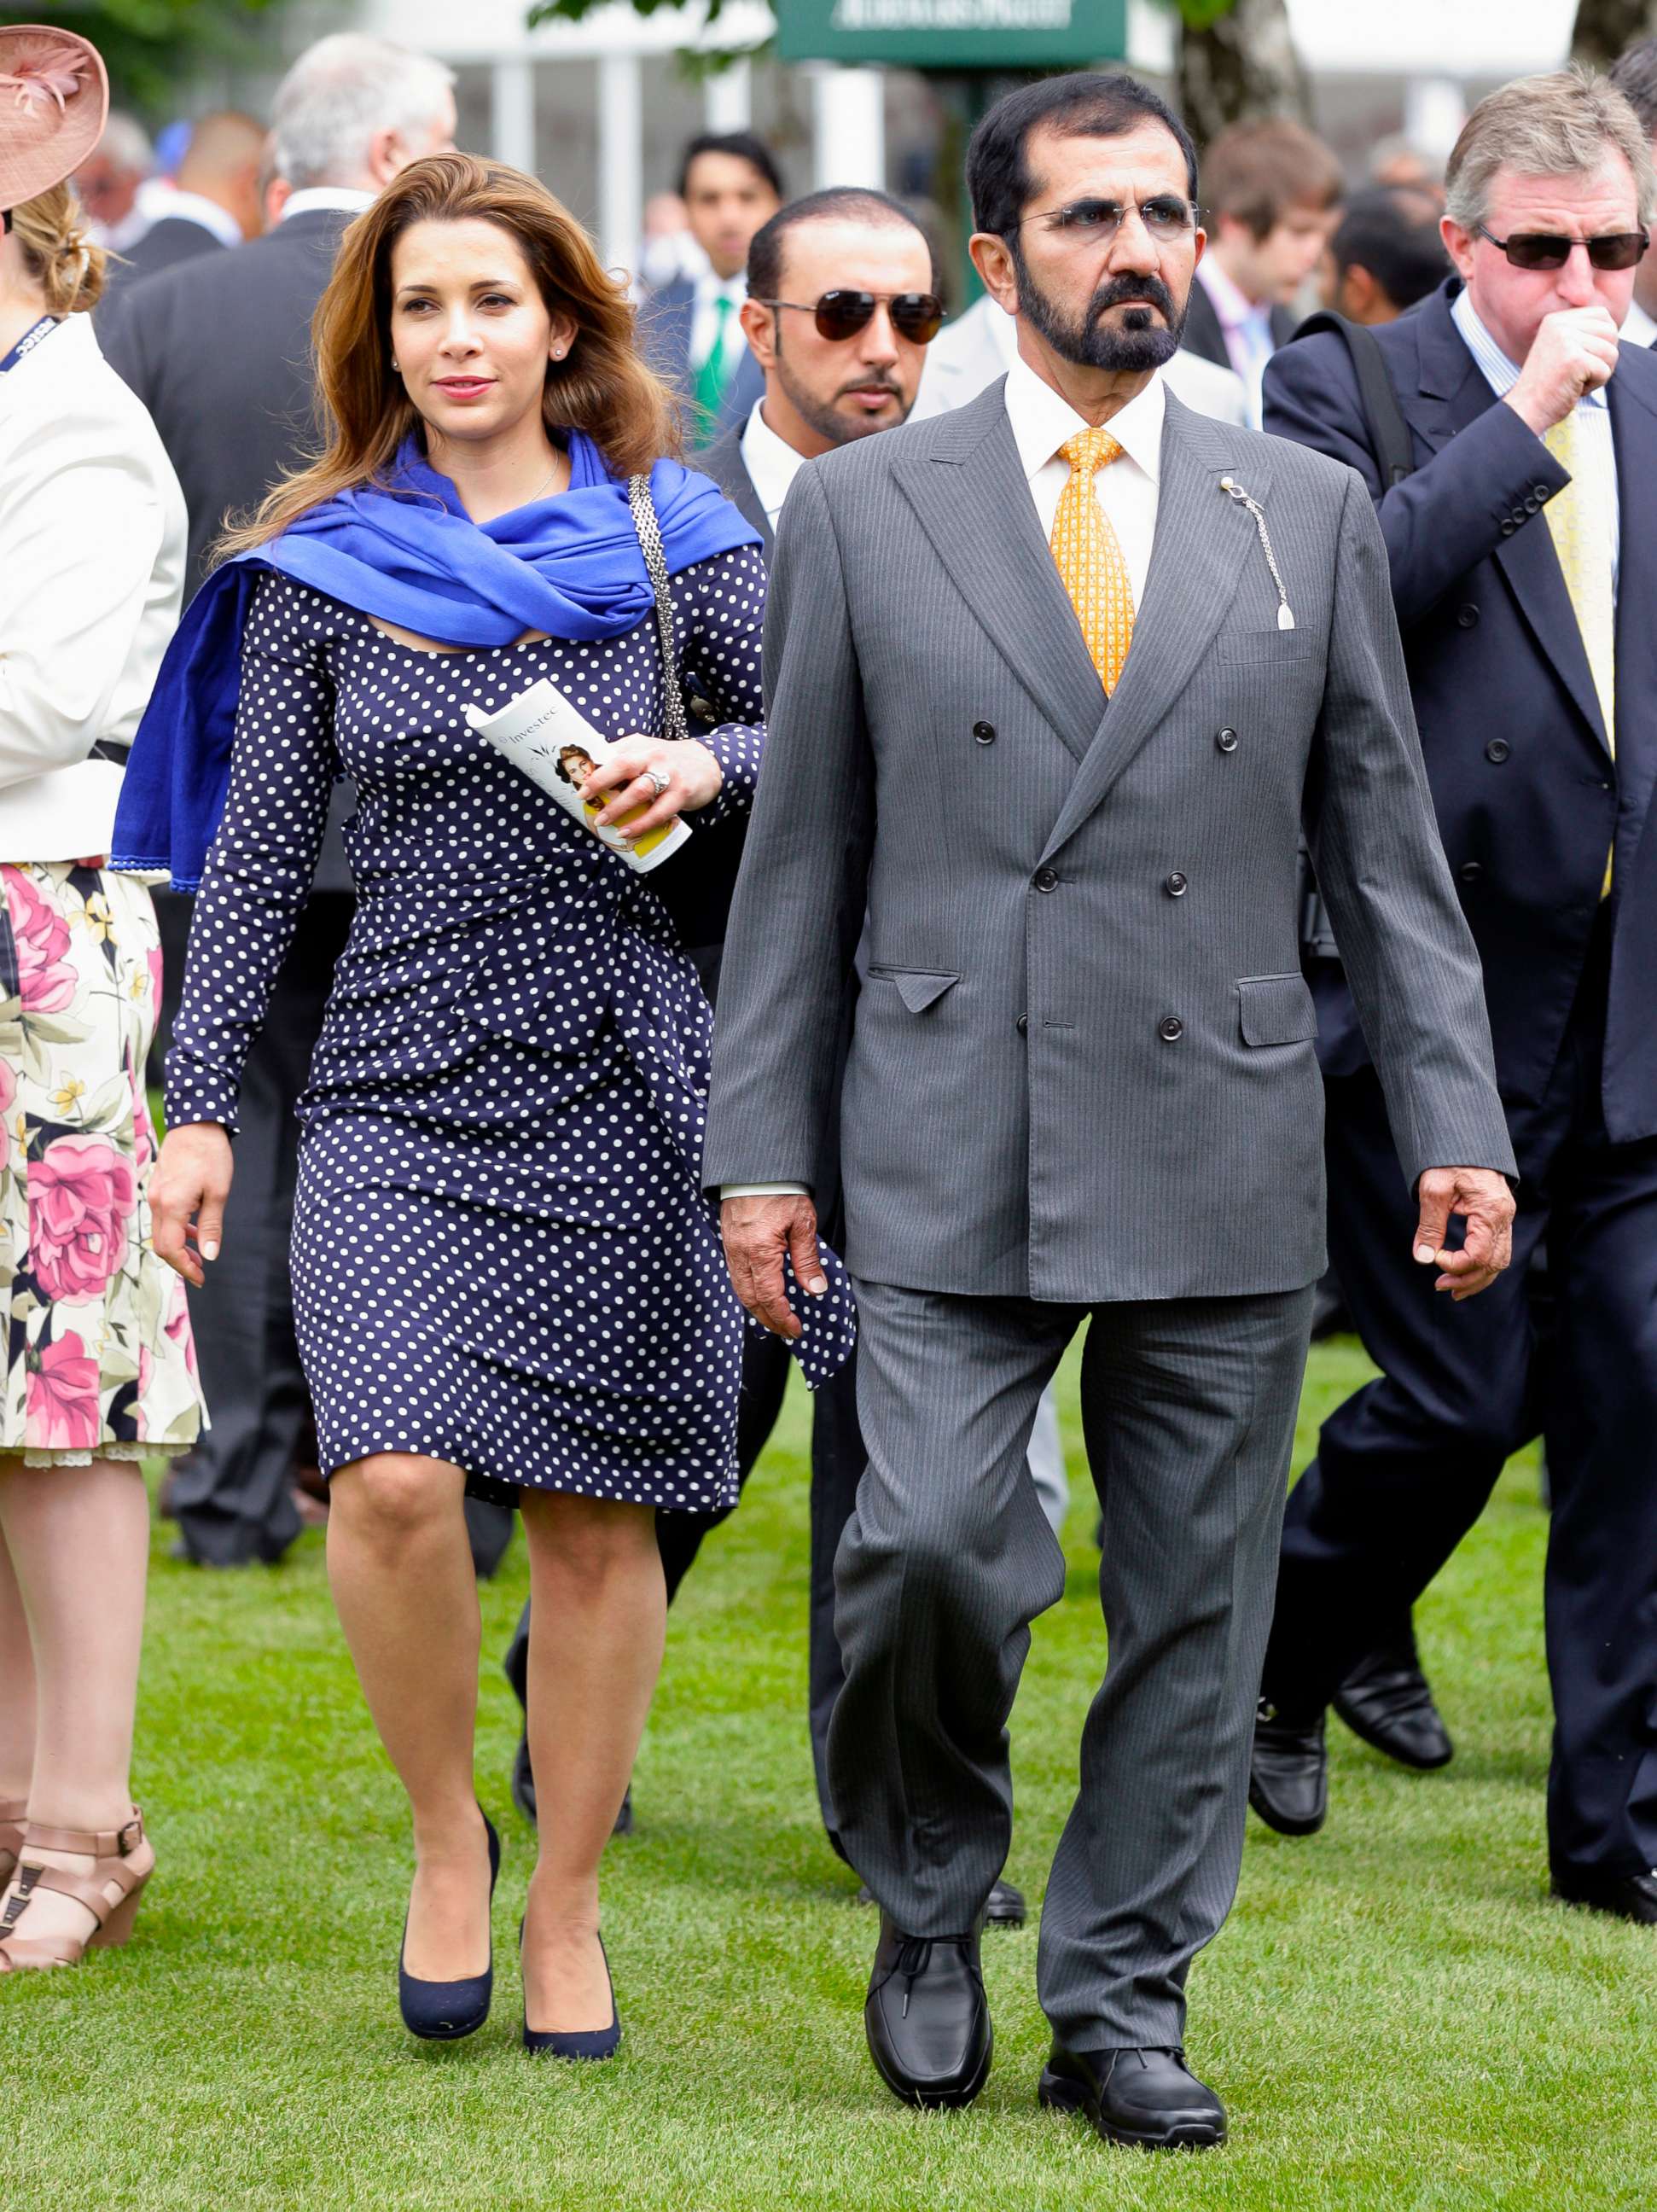 PHOTO: Princess Haya of Jordan and Sheikh Mohammed bin Rashid Al Maktoum attend Ladies Day at the Investec Derby Festival horse racing meeting at Epsom Downs on June 1, 2012, in Epsom, England.